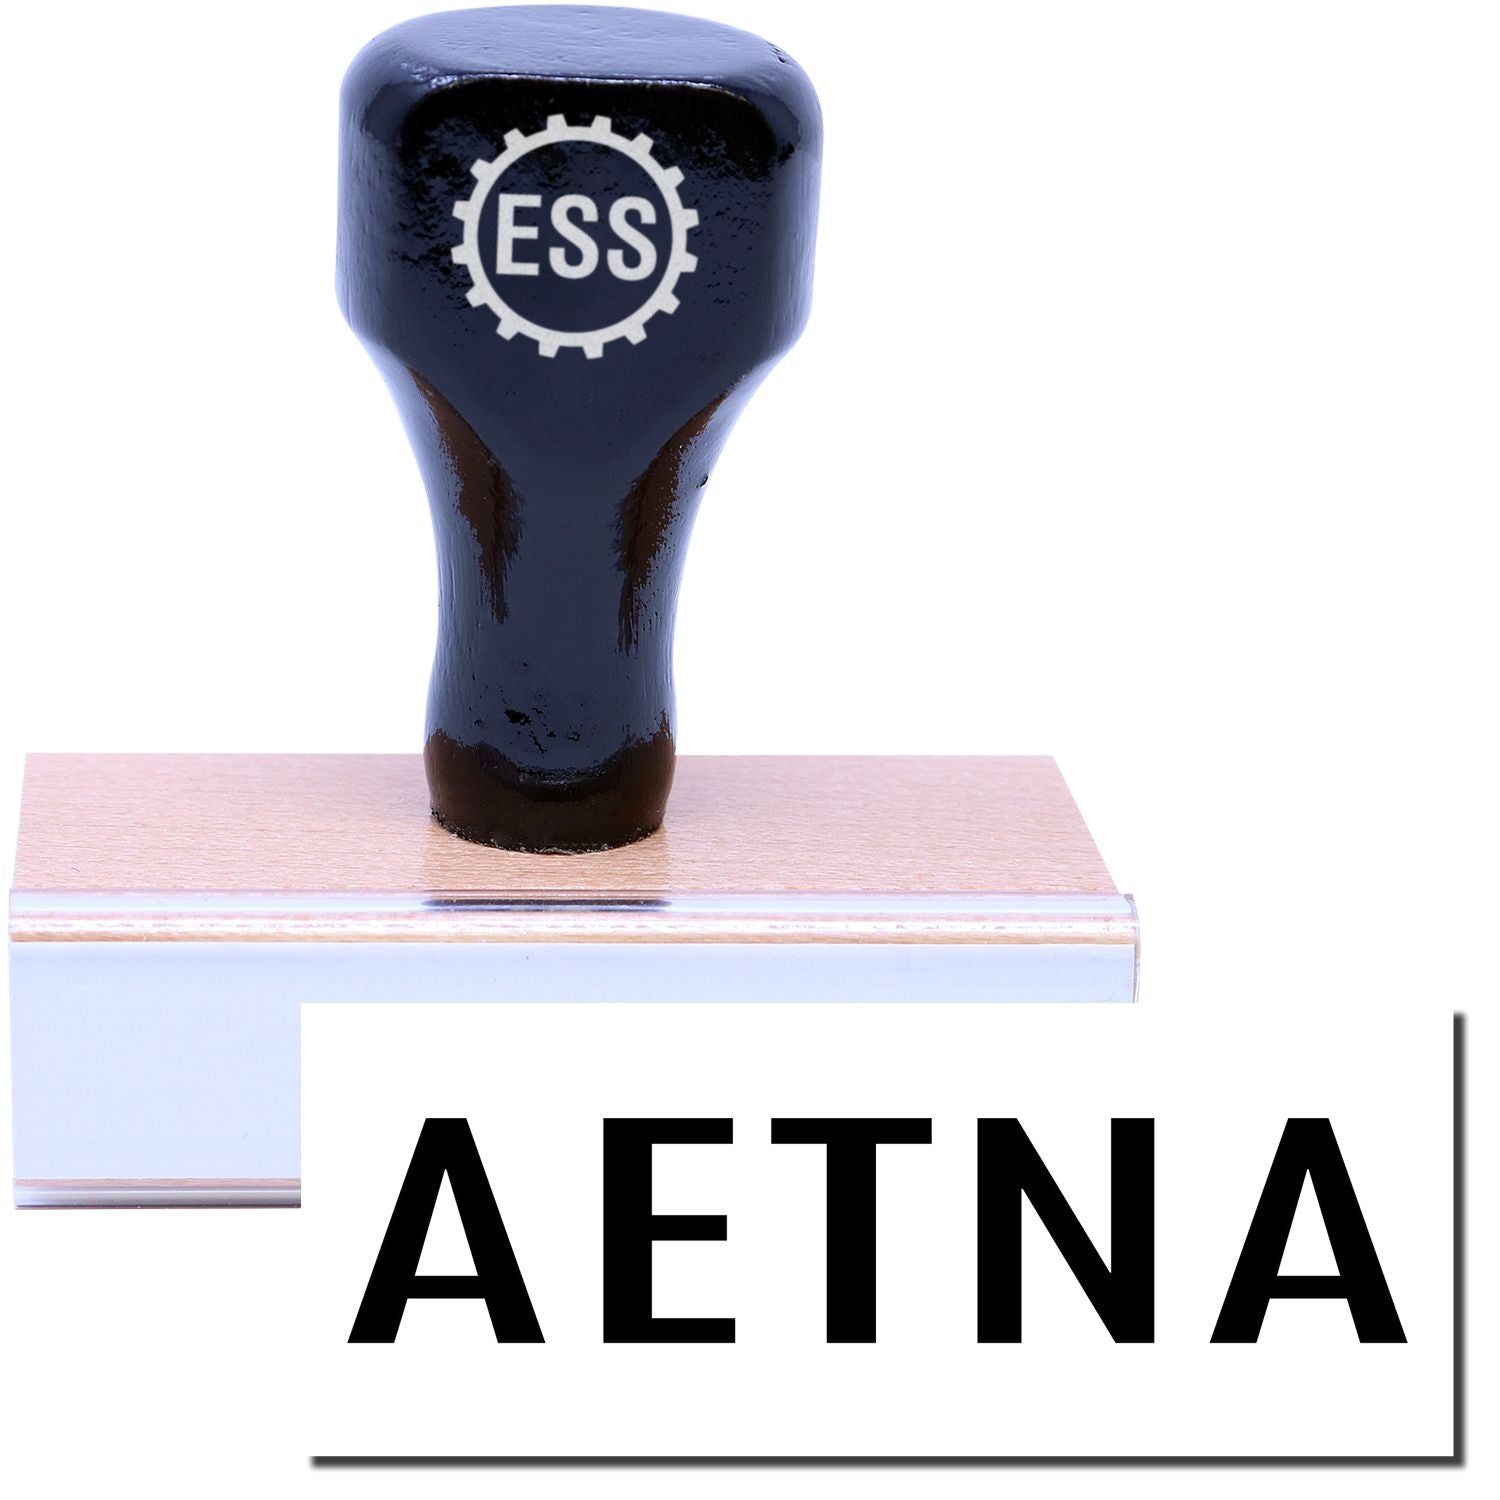 A stock office medical rubber stamp with a stamped image showing how the text "AETNA" is displayed after stamping.